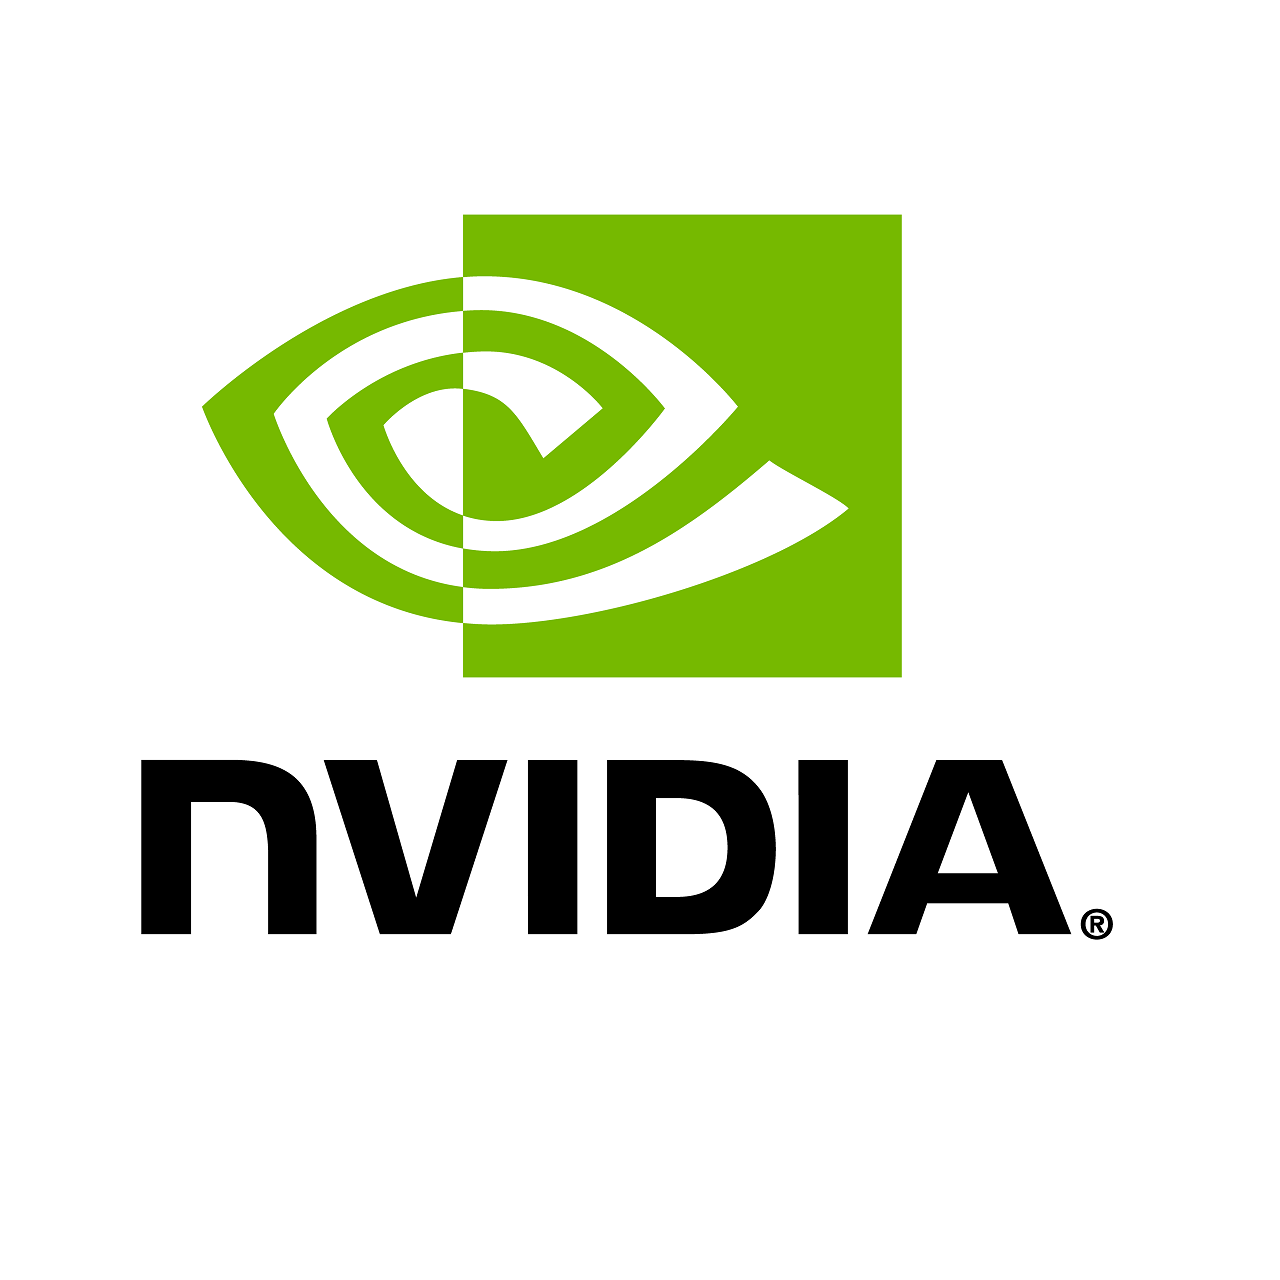 NVIDIA Support and Warranty, Silver, 5 Year, for SB7800 Series Switch